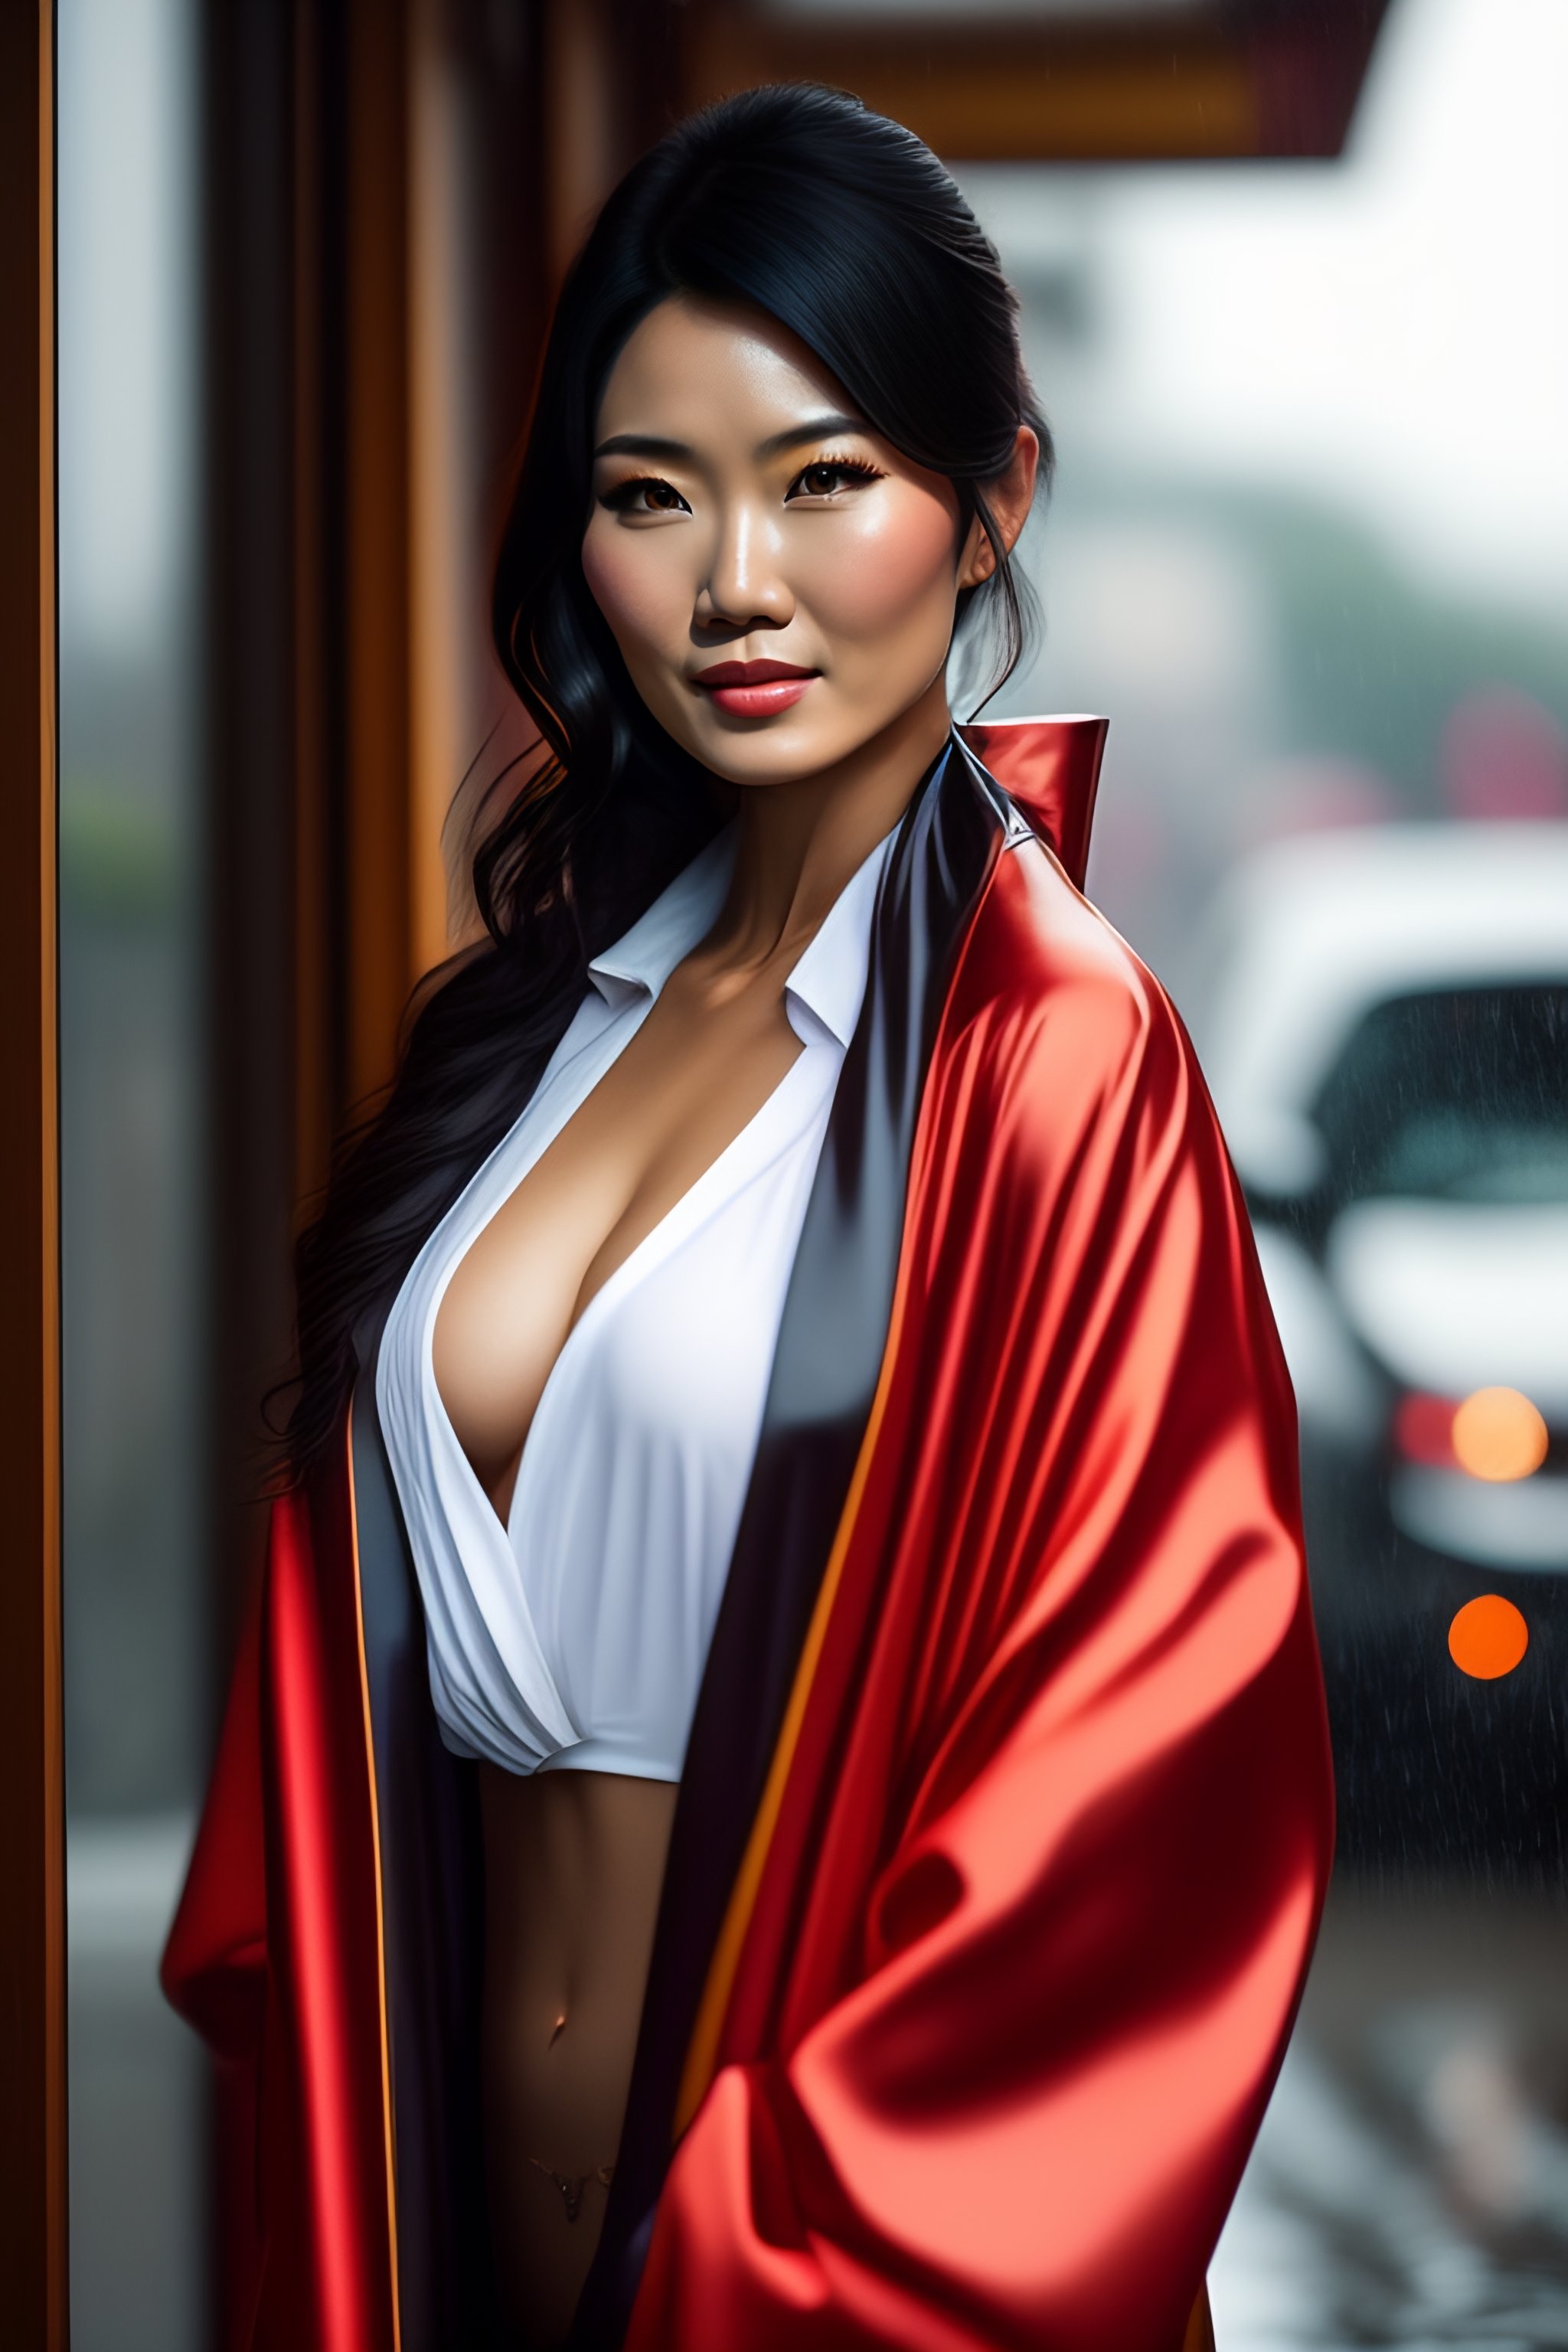 Lexica Shapely Asian Woman Wearing Wet Kimono Stormy Day